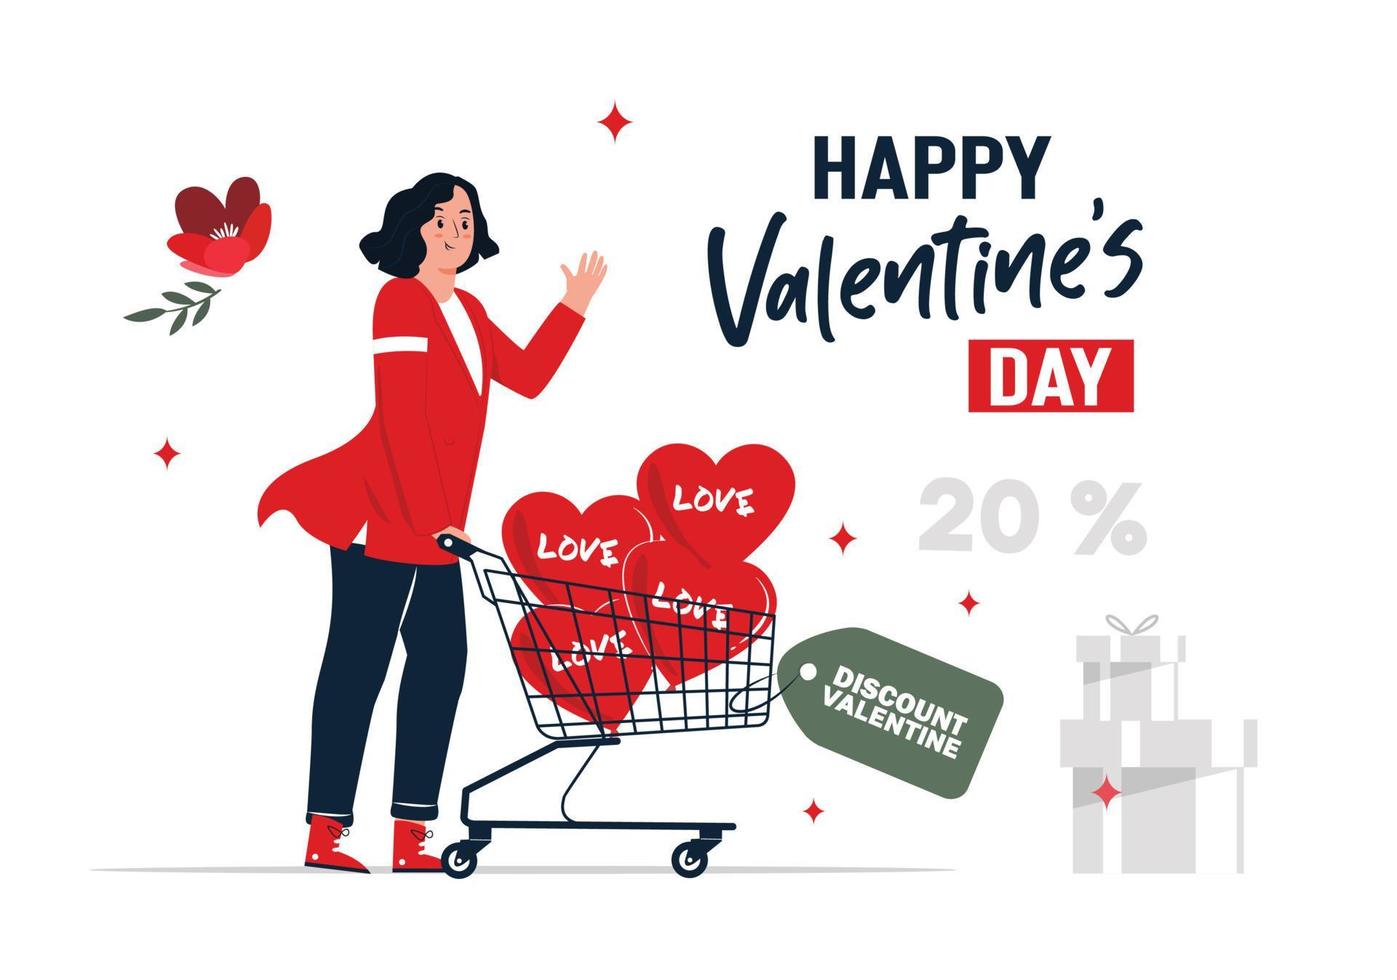 Valentine's Day illustration of a person carrying a discount trolley on Valentine's Day vector